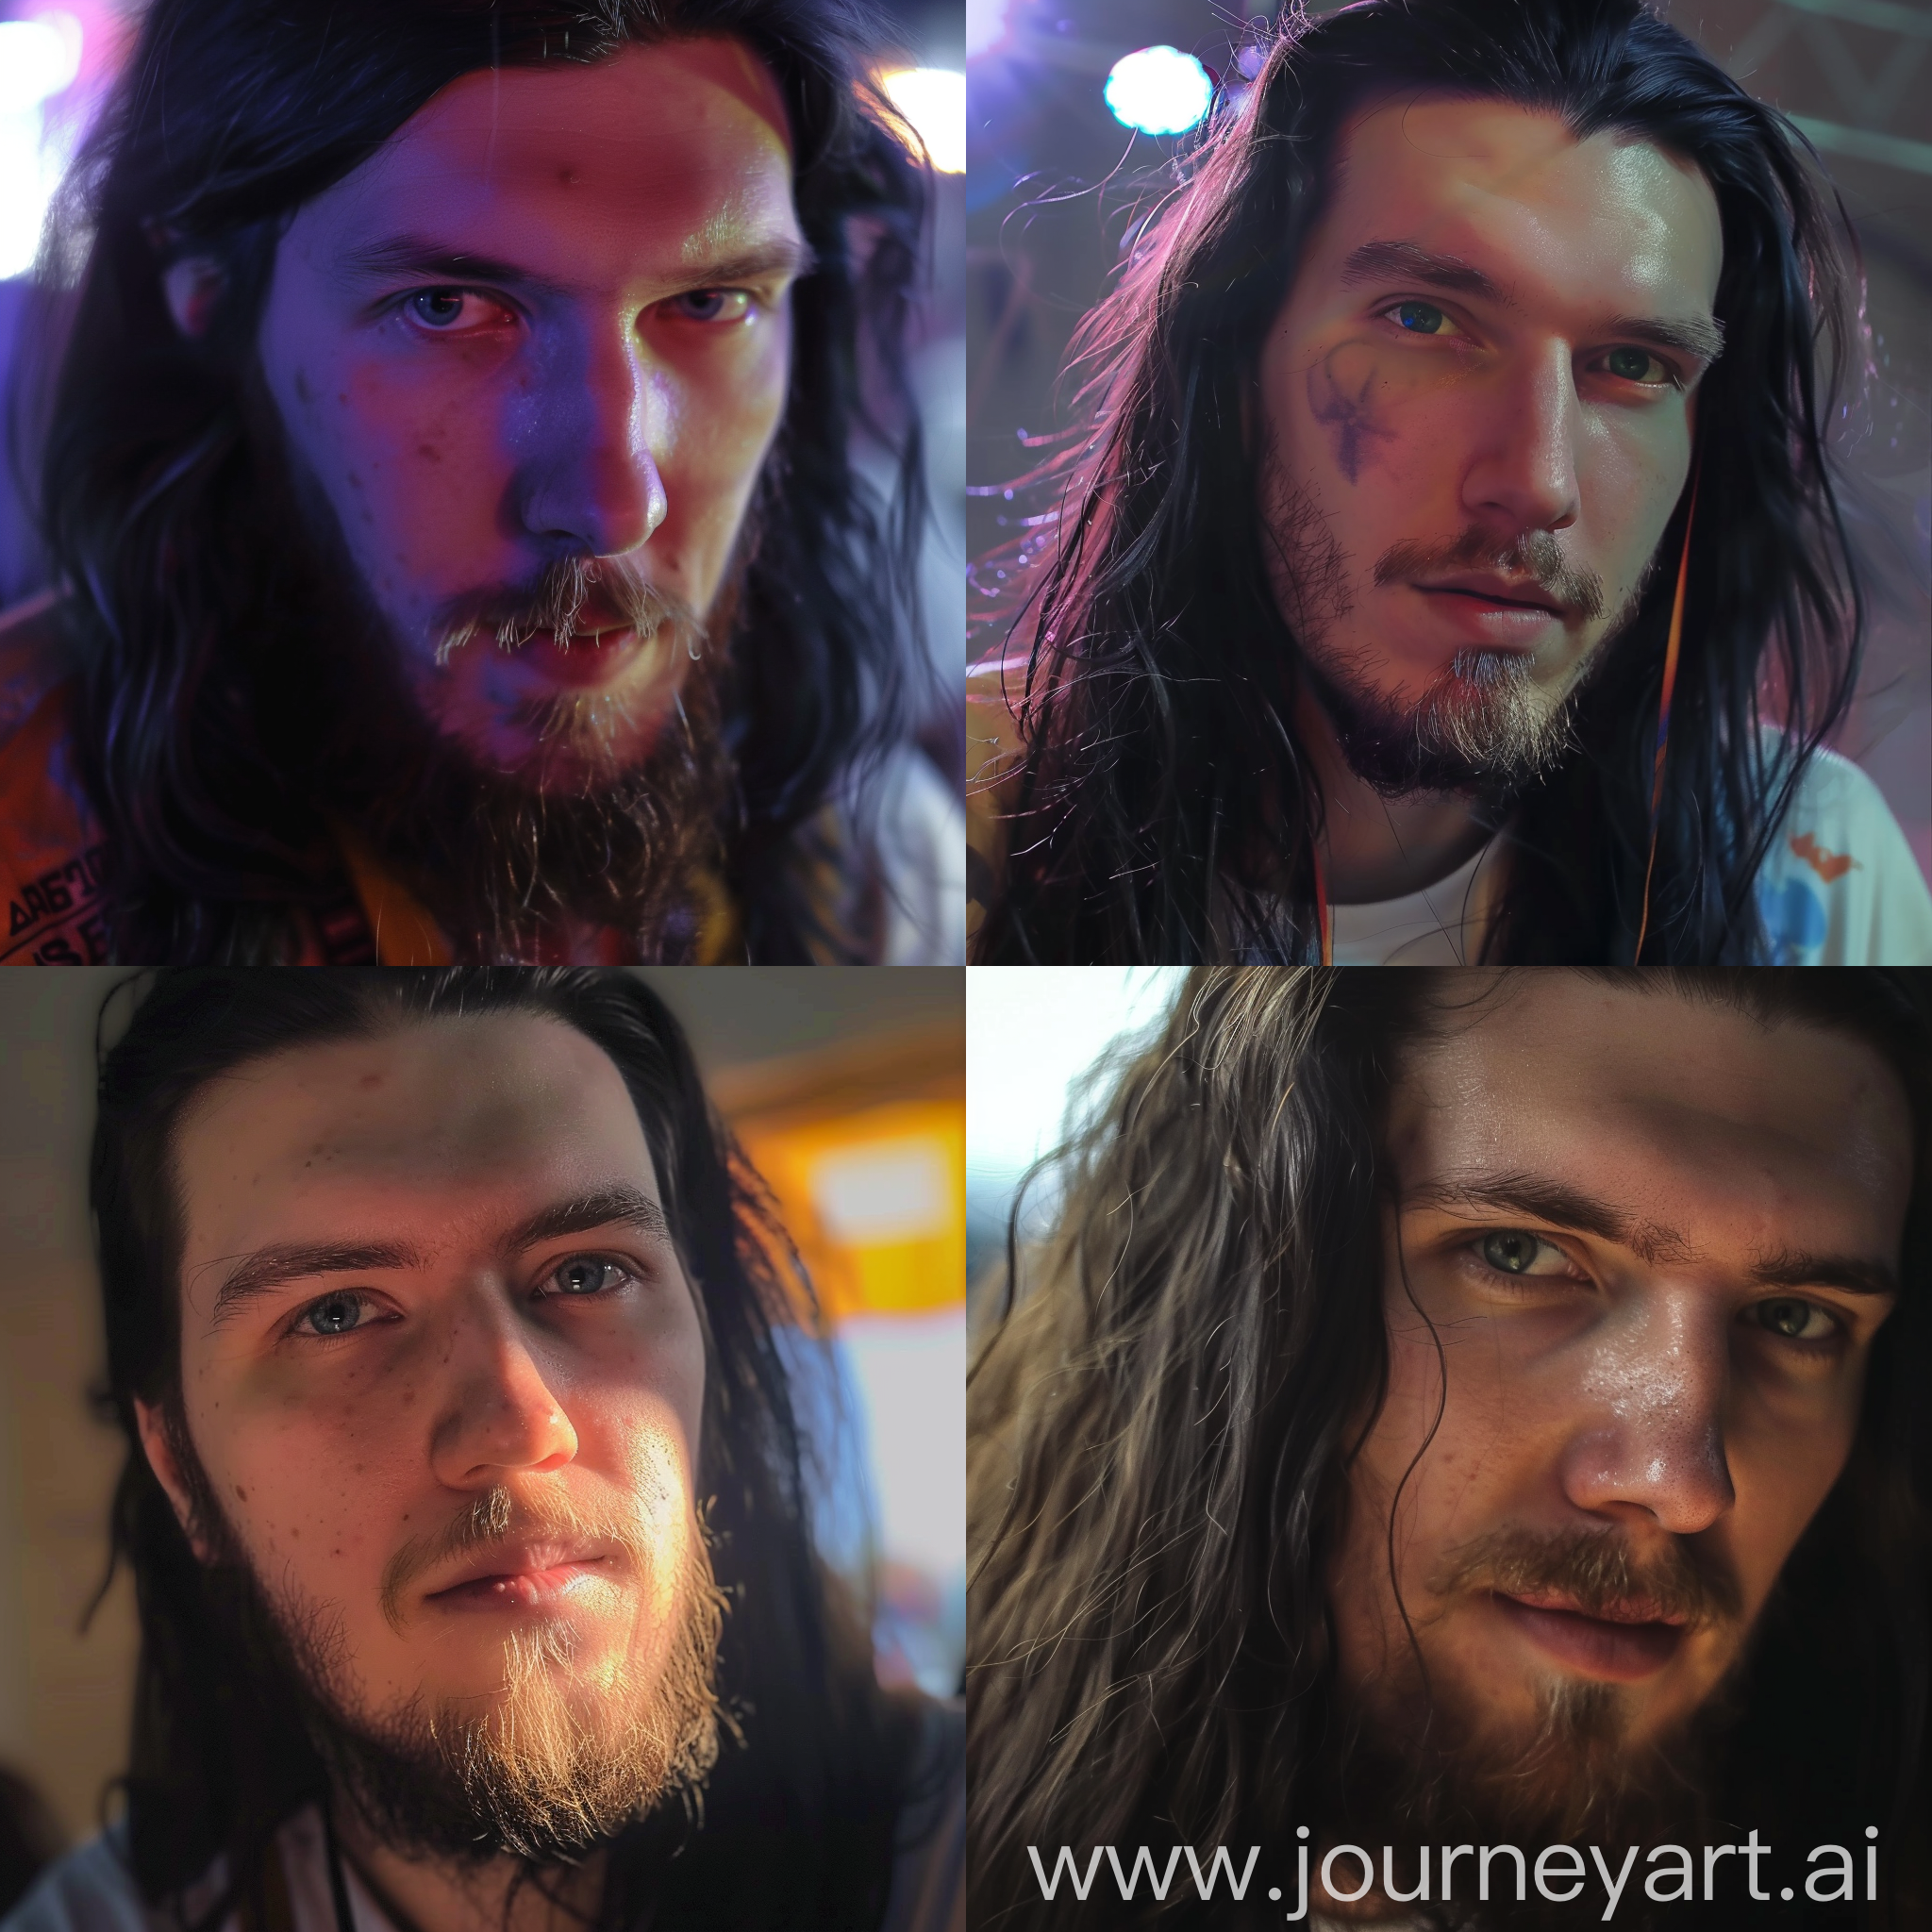 Slovak YouTuber FiFqo, with long black hair being a DJ, at an event, beach party, playing music, Dancing, pink shirt, cool lights, YouTuber, FiFqo, Filip Jánoš, use this picture of his face as sample: https://cdn.discordapp.com/attachments/828359970583216138/1226134617950781544/image.png?ex=6623a9d9&is=661134d9&hm=8e0699886e6a9b735ed10b358e7afb51e726b161103d56a9aba1cbcdc2d90628& make sure you preserve his face well, https://media.discordapp.net/attachments/828359970583216138/1226136106270068827/image.png?ex=6623ab3c&is=6611363c&hm=5ae9be4702e999f9681915da9e76a7c25f0043a5b9df1ad908a6dcef544335e3&=&format=webp&quality=lossless&width=413&height=437 his beard too, keep it as it is in the sample images, use 24mm lens, keep bokeh at 1.2F stop, lens flare can be seen, here is a one more detailed sample up close to his face: https://media.discordapp.net/attachments/828359970583216138/1226137699858124851/image.png?ex=6623acb8&is=661137b8&hm=2f701350e91a0f9baf0d24f07a2a72e5b51b2d8be9b86b92a8499636e3aa9d1a&=&format=webp&quality=lossless&width=1055&height=897